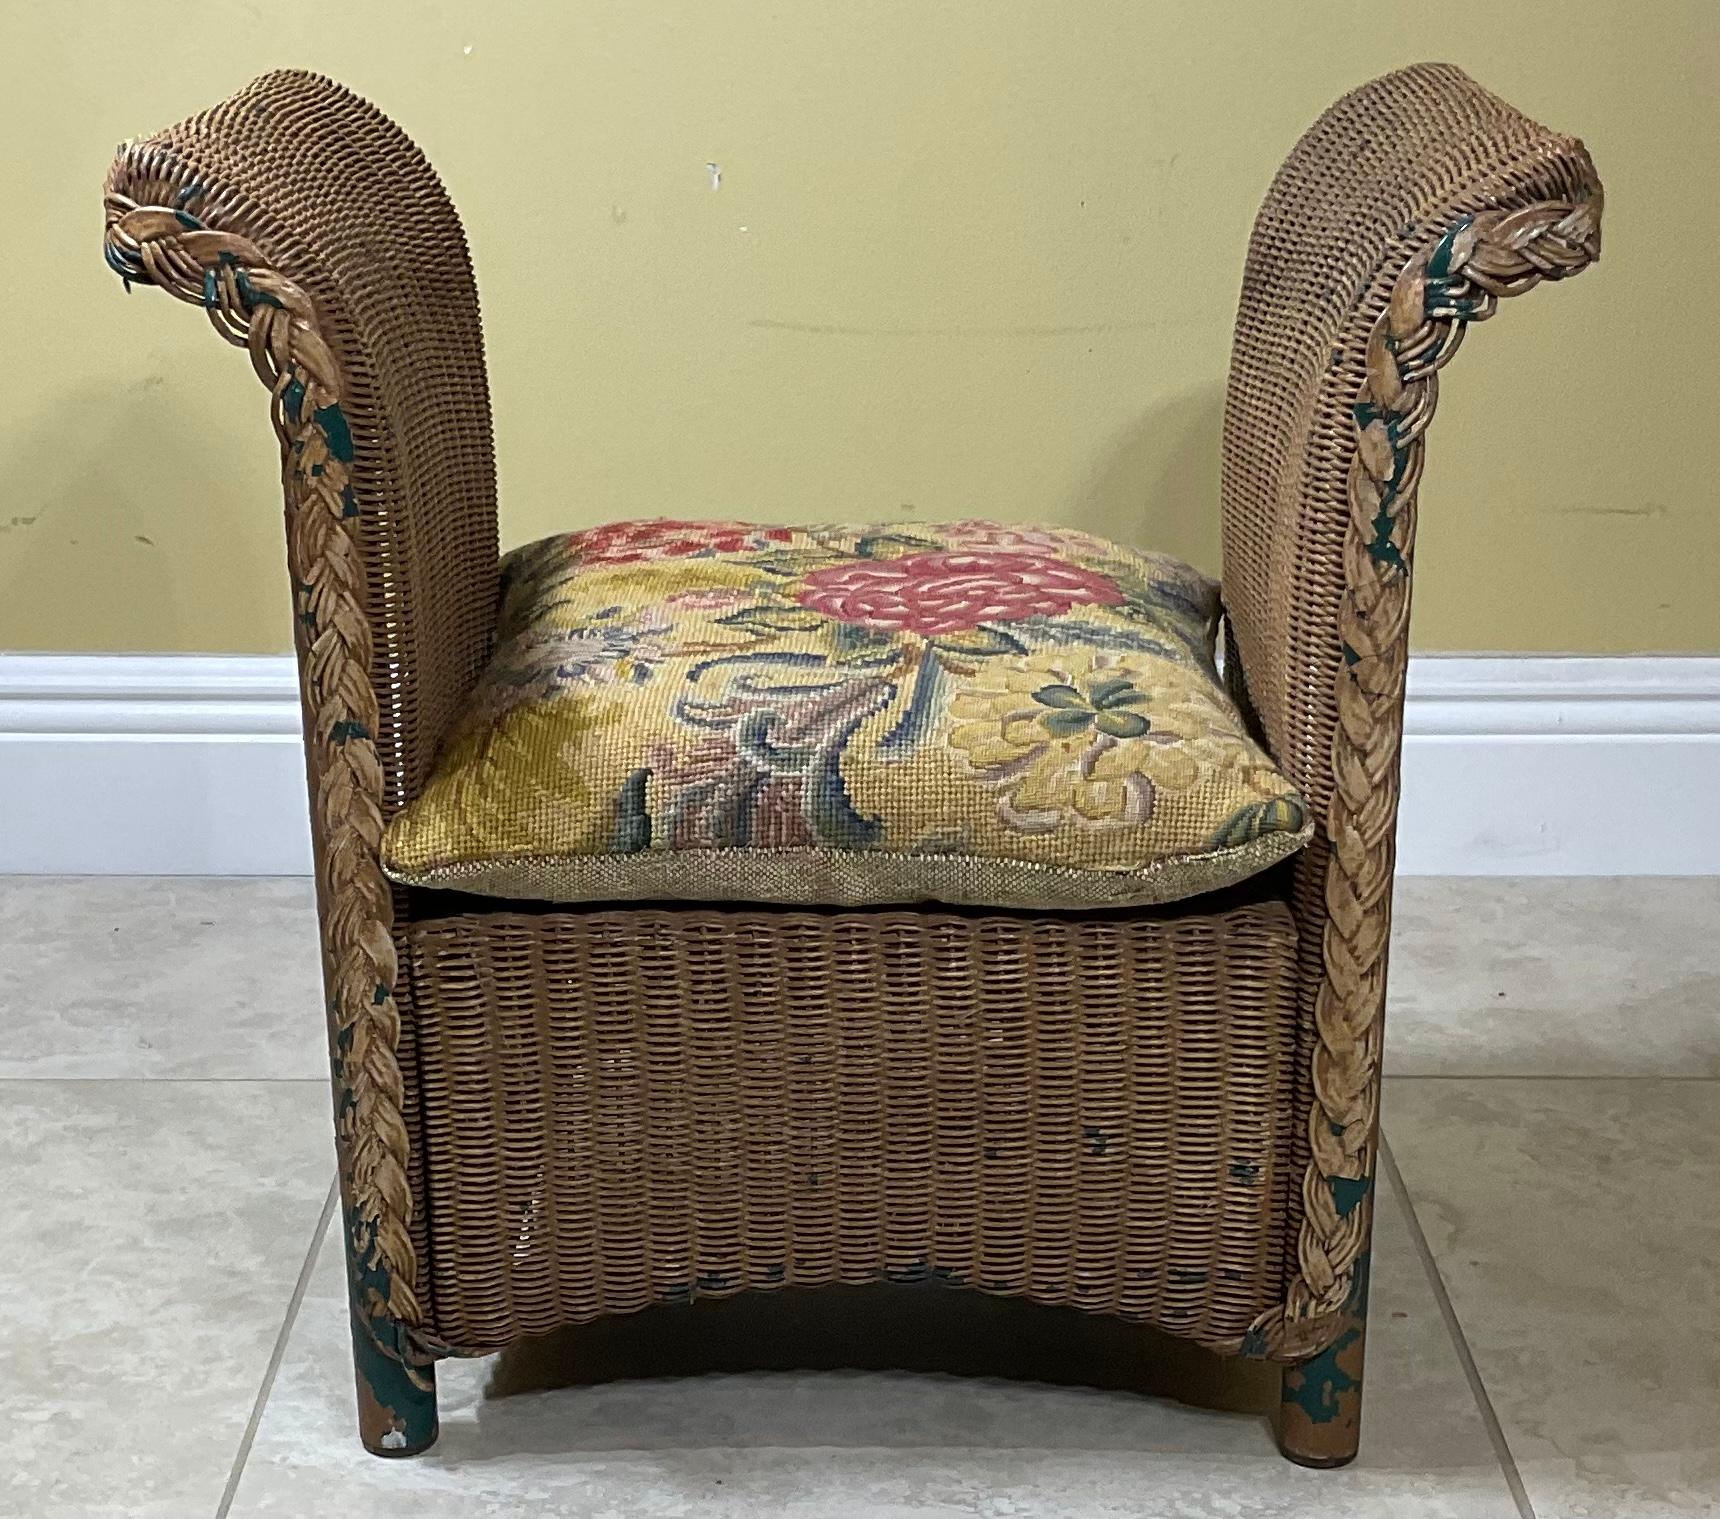 Funky child armchair and pillow crafted in wicker or reed with braided front pattern, all with solid piping support
Beautiful vintage needlepoint pillow is included.
    